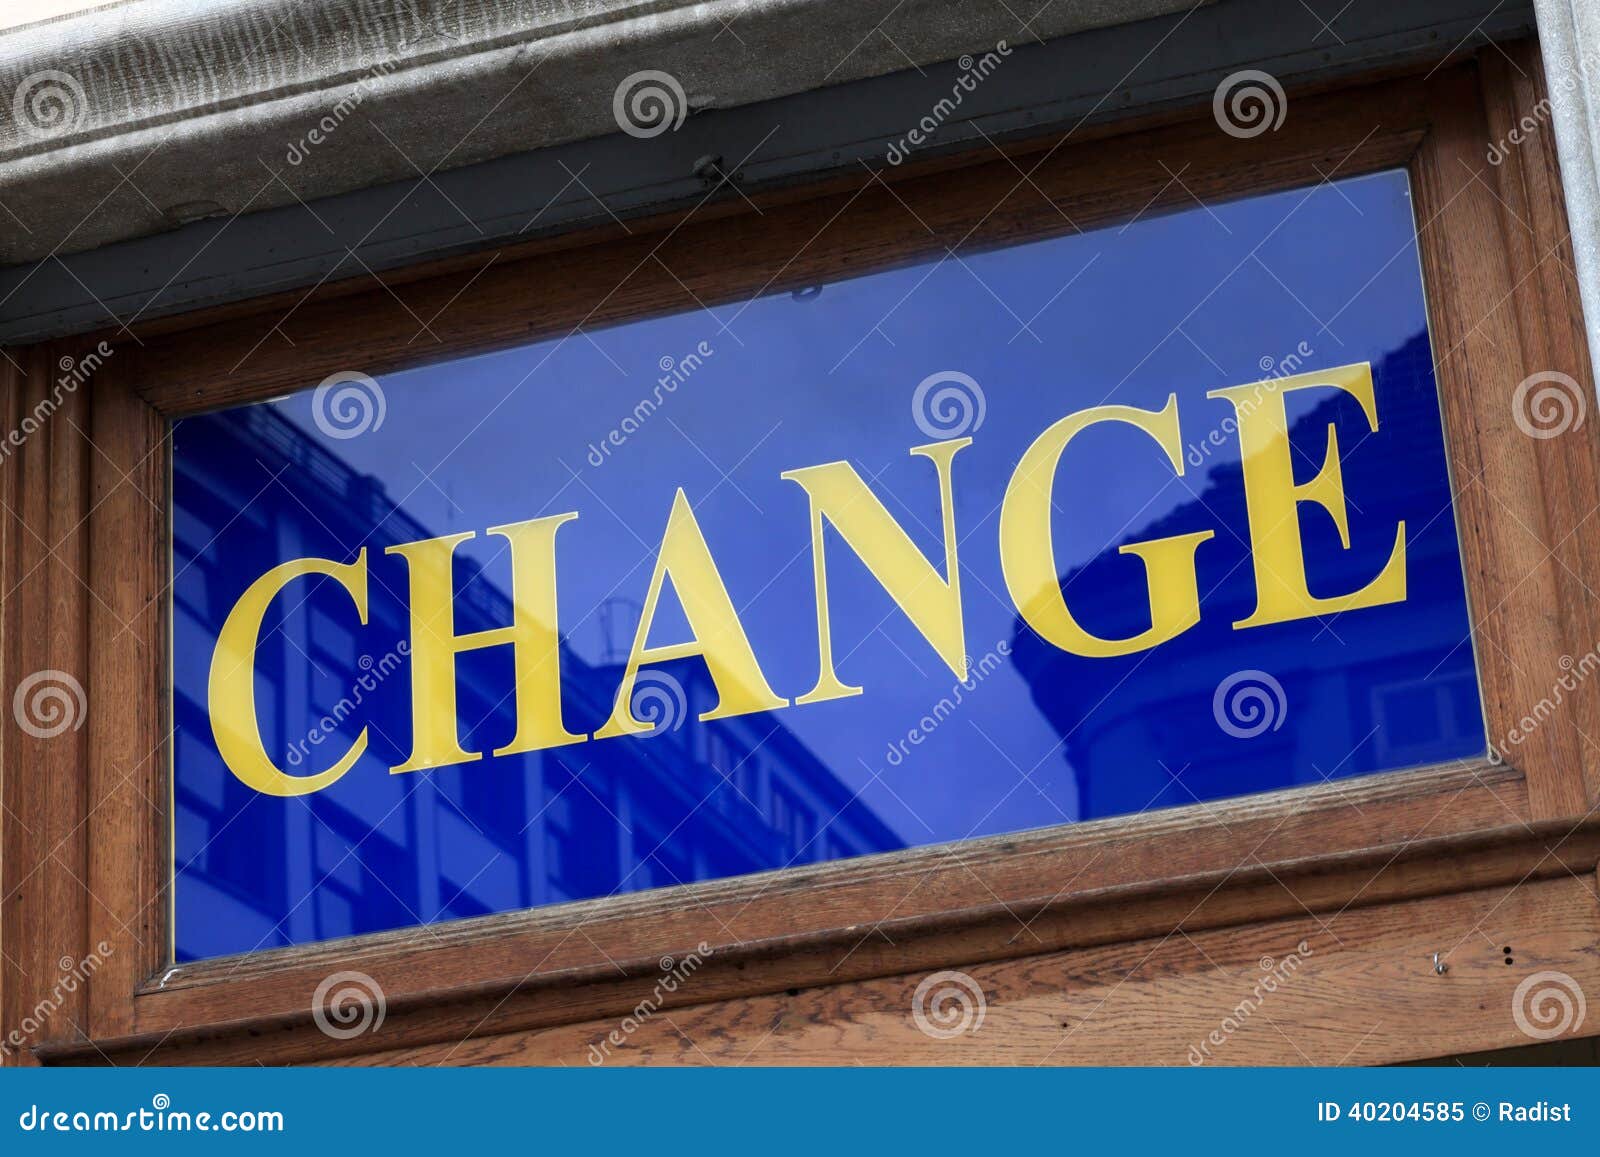 Blue change signboard stock image. Image of business - 40204585